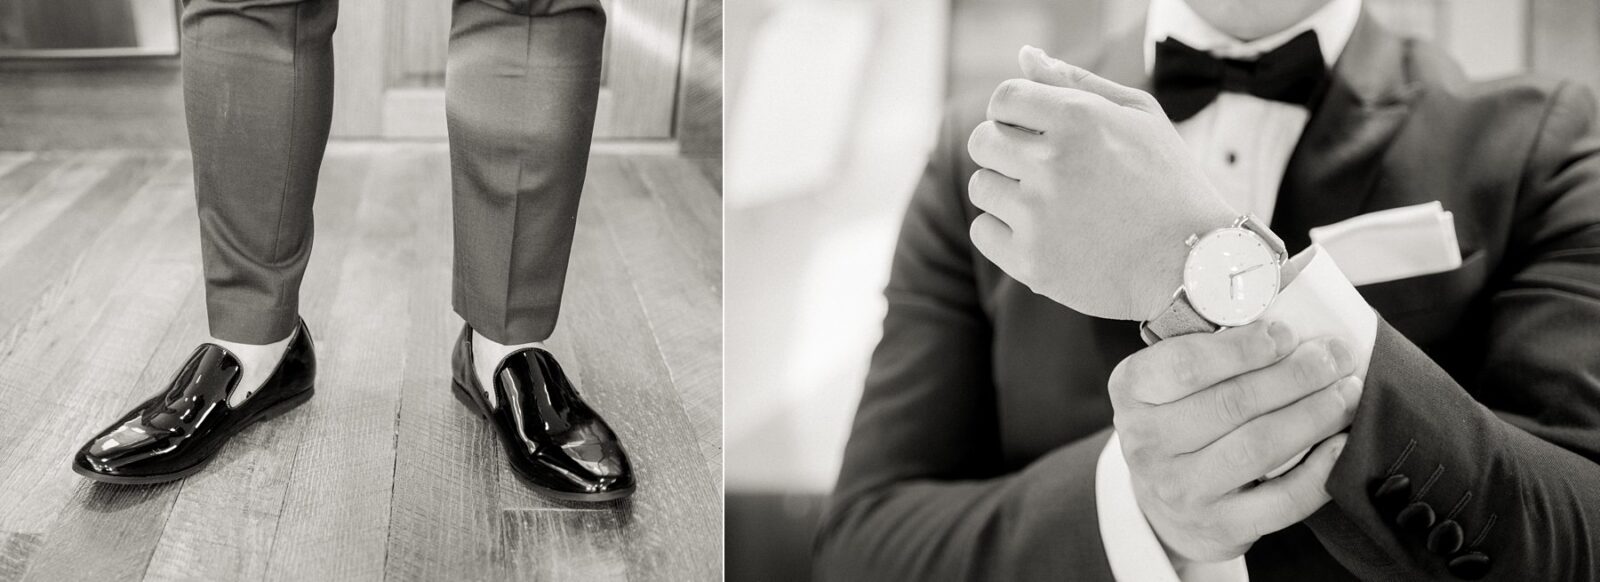 black and white wedding detail photos, groom getting ready, groom detail photos, groom wearing watch, distillers hall, dripping springs distillery wedding venue, tara paige weddings, wedding shoes without socks, austin wedding photography, hill country wedding photography